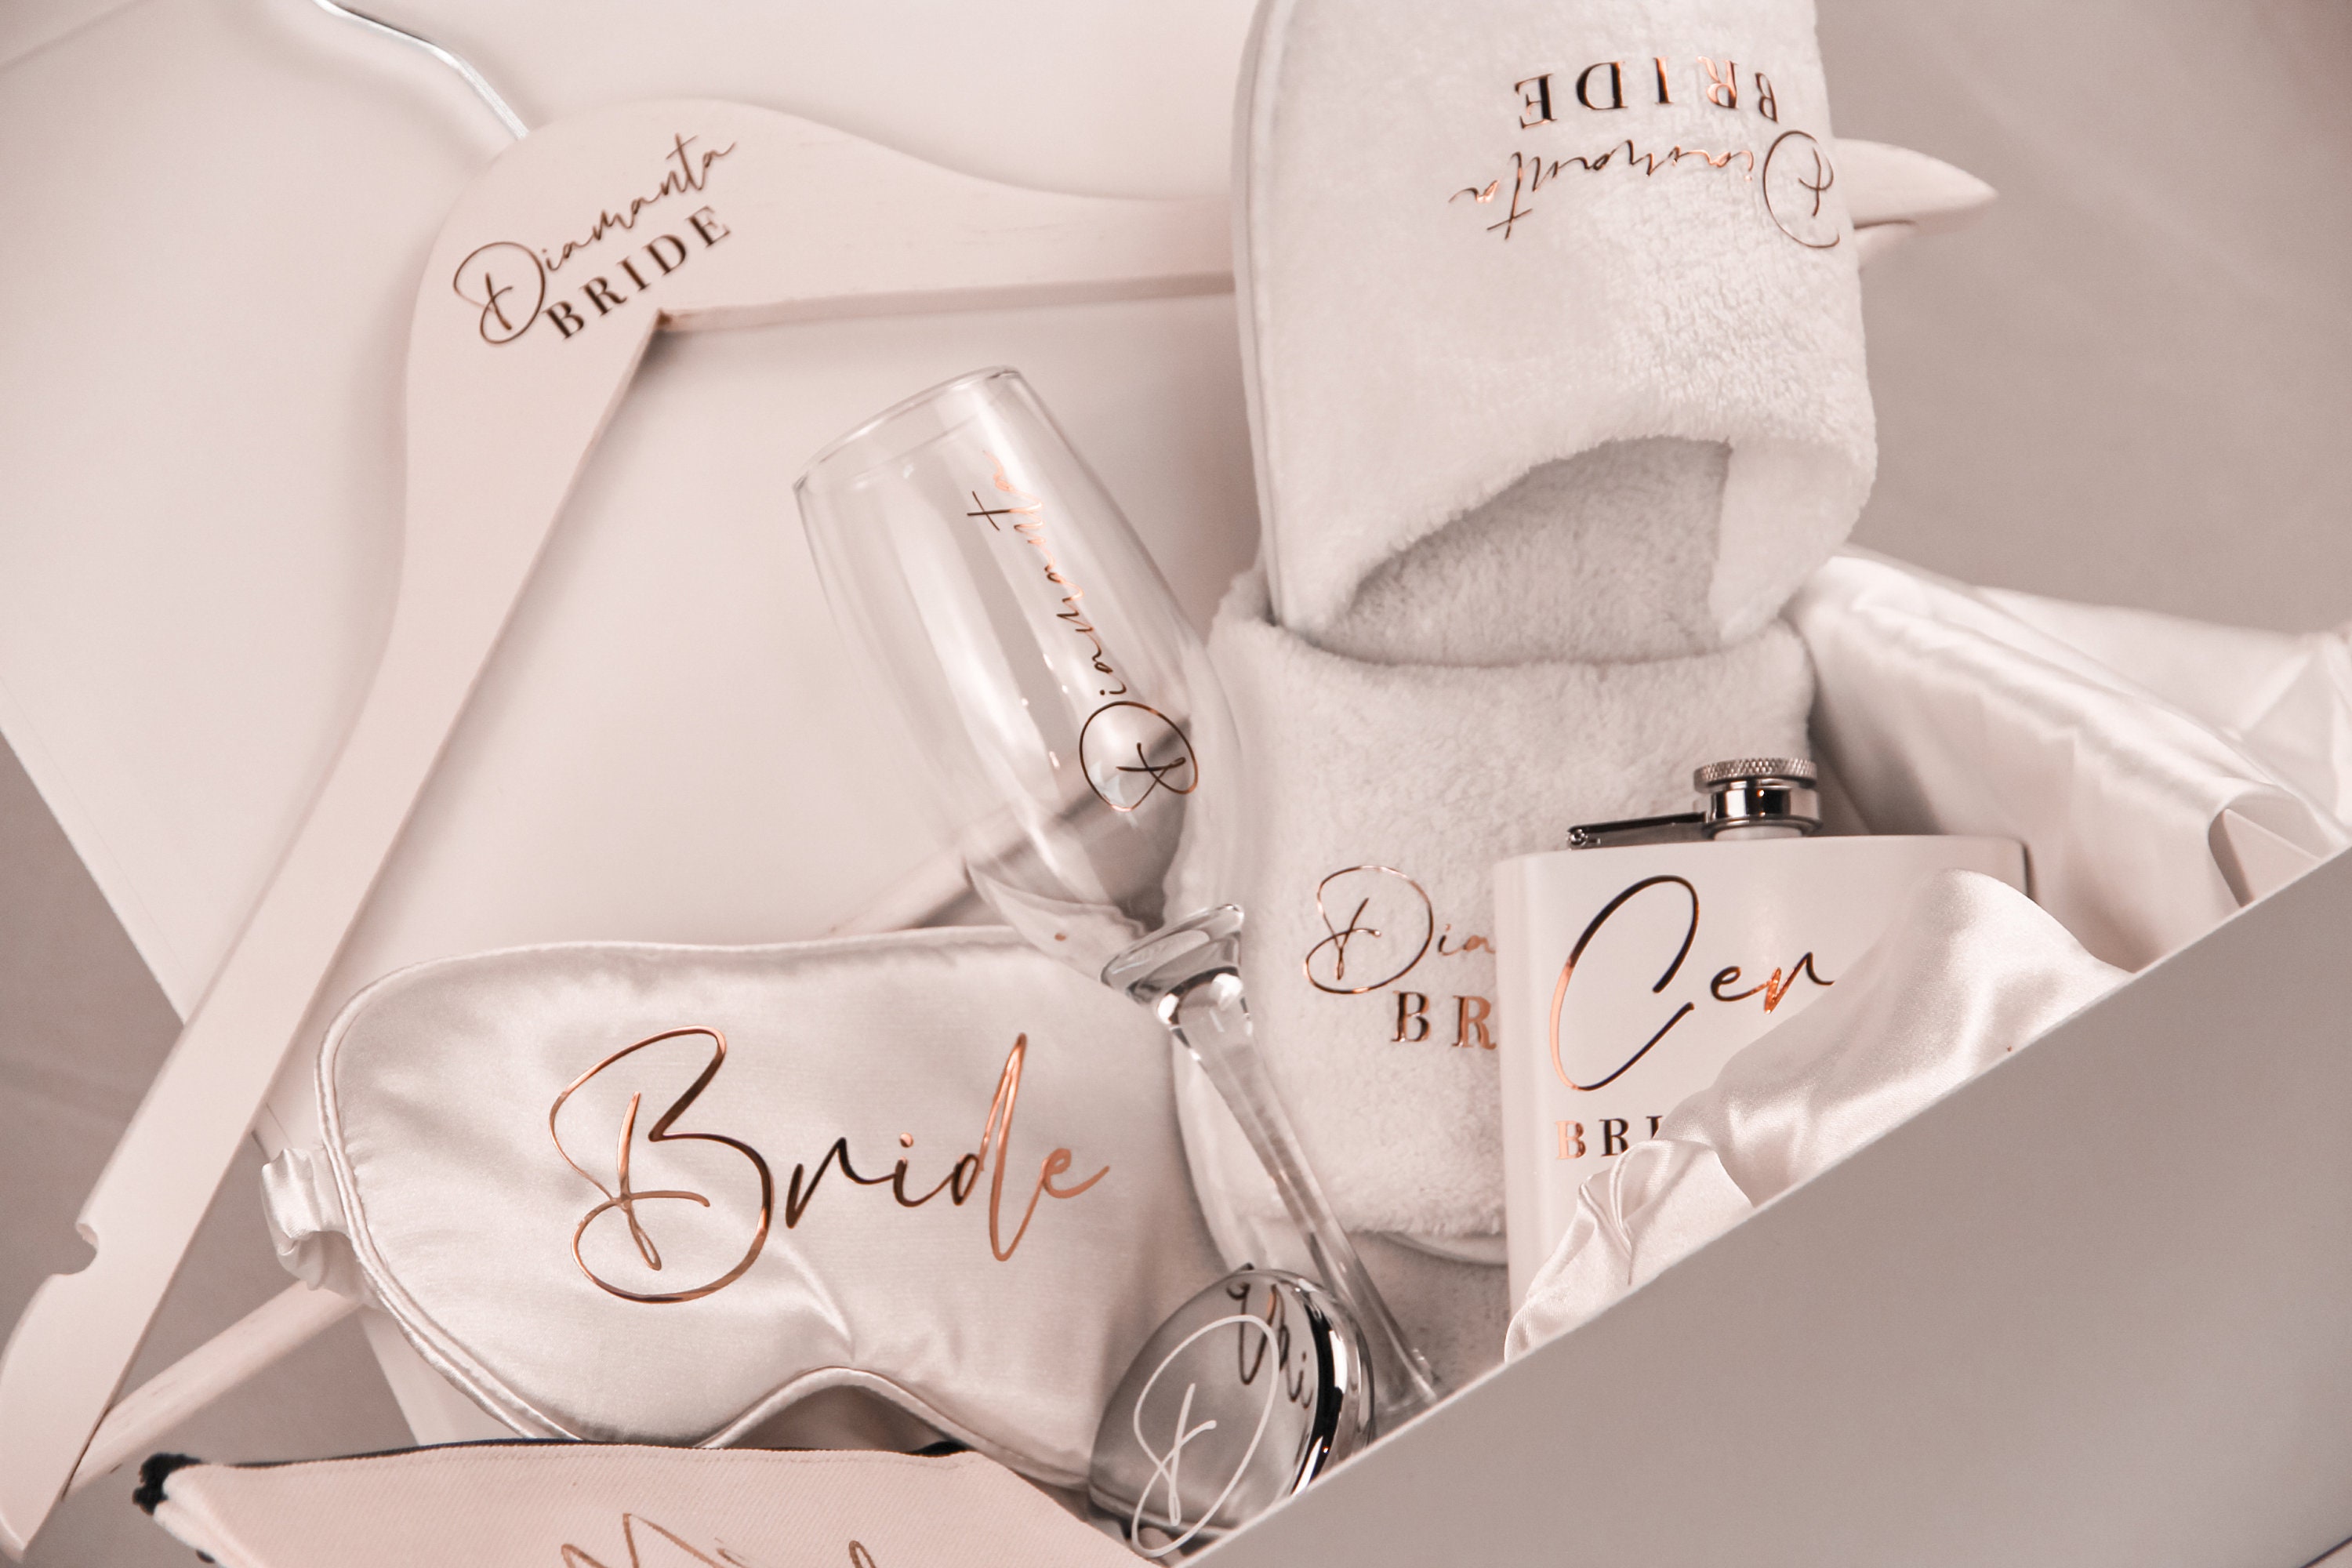 Pin on Products ☆ BRIDAL PARTY GIFTS ☆